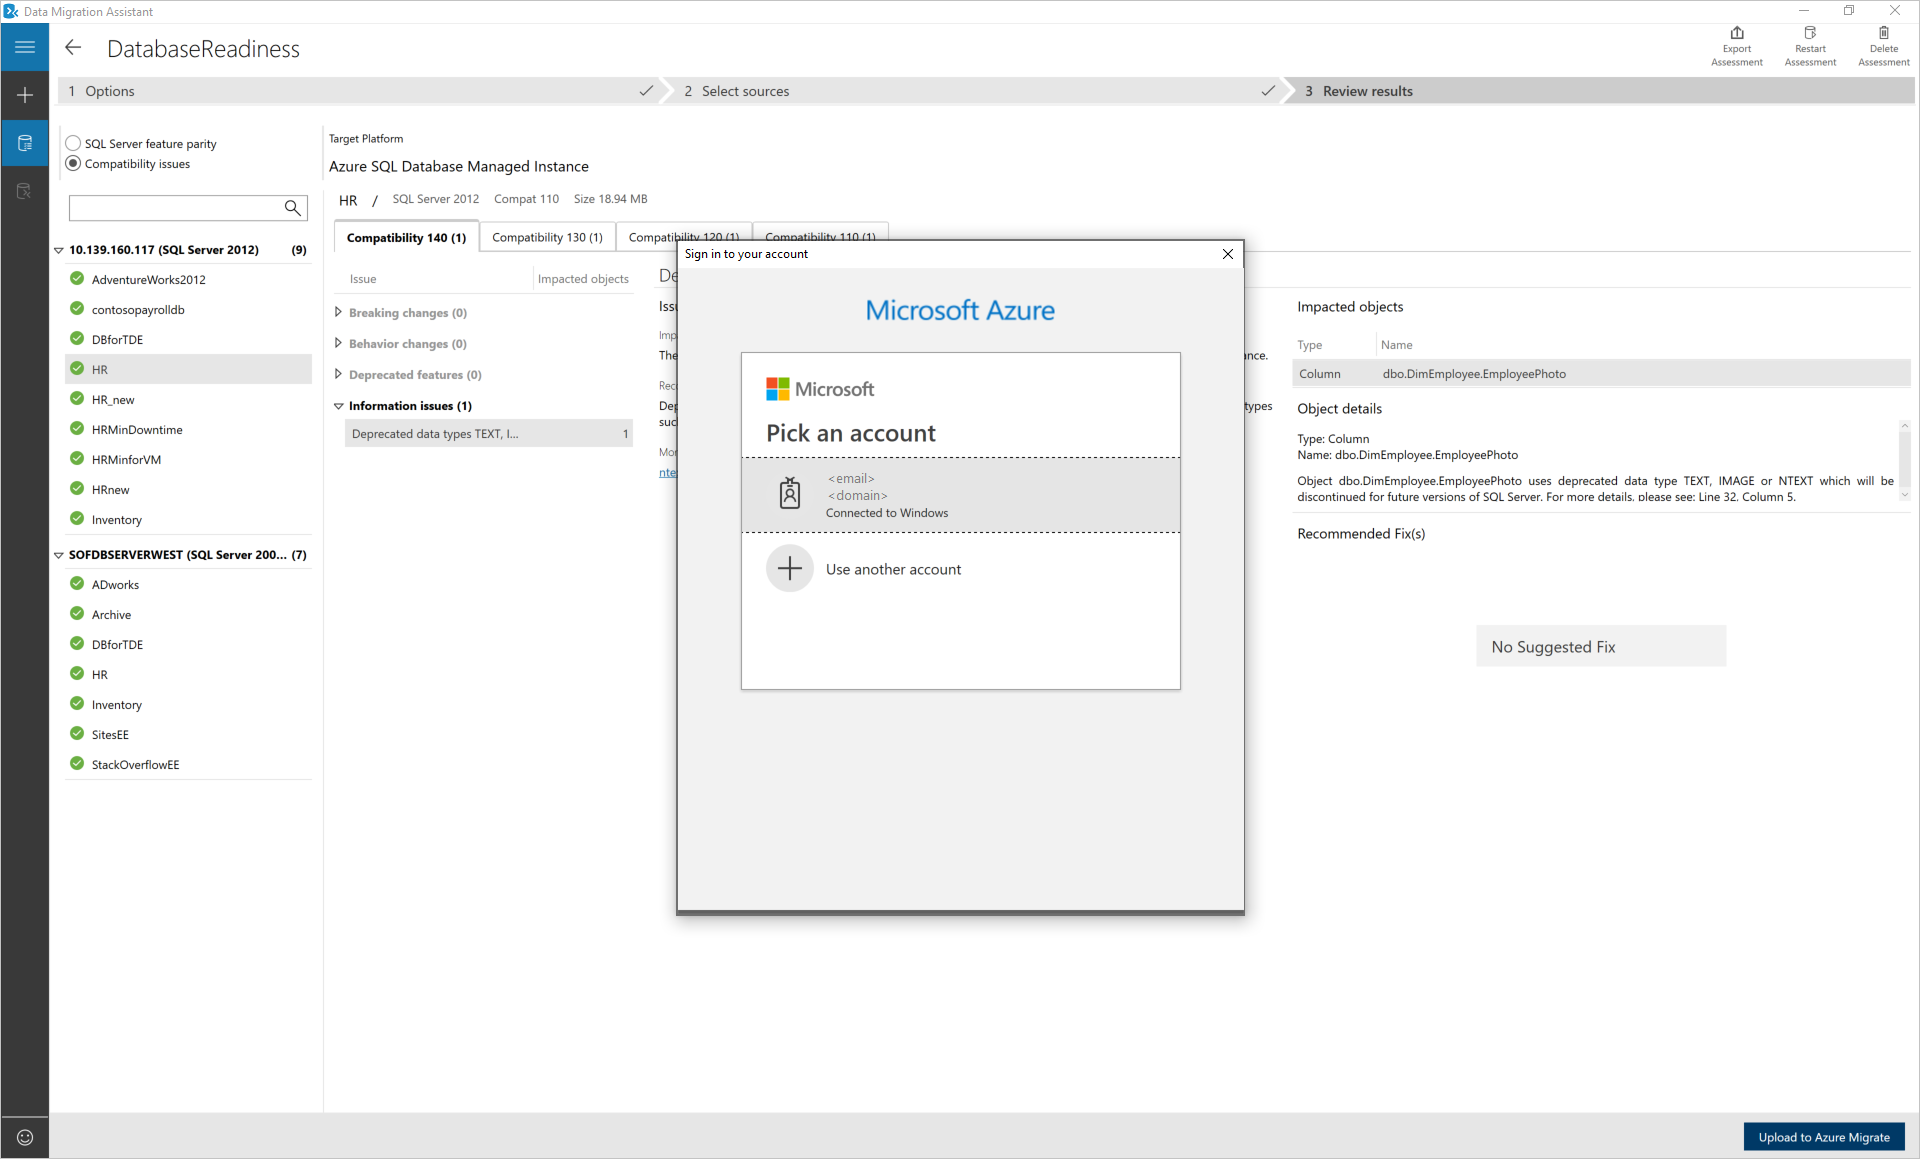 Screenshot of the Data Migration Assistant showing the Azure portal sign in window.